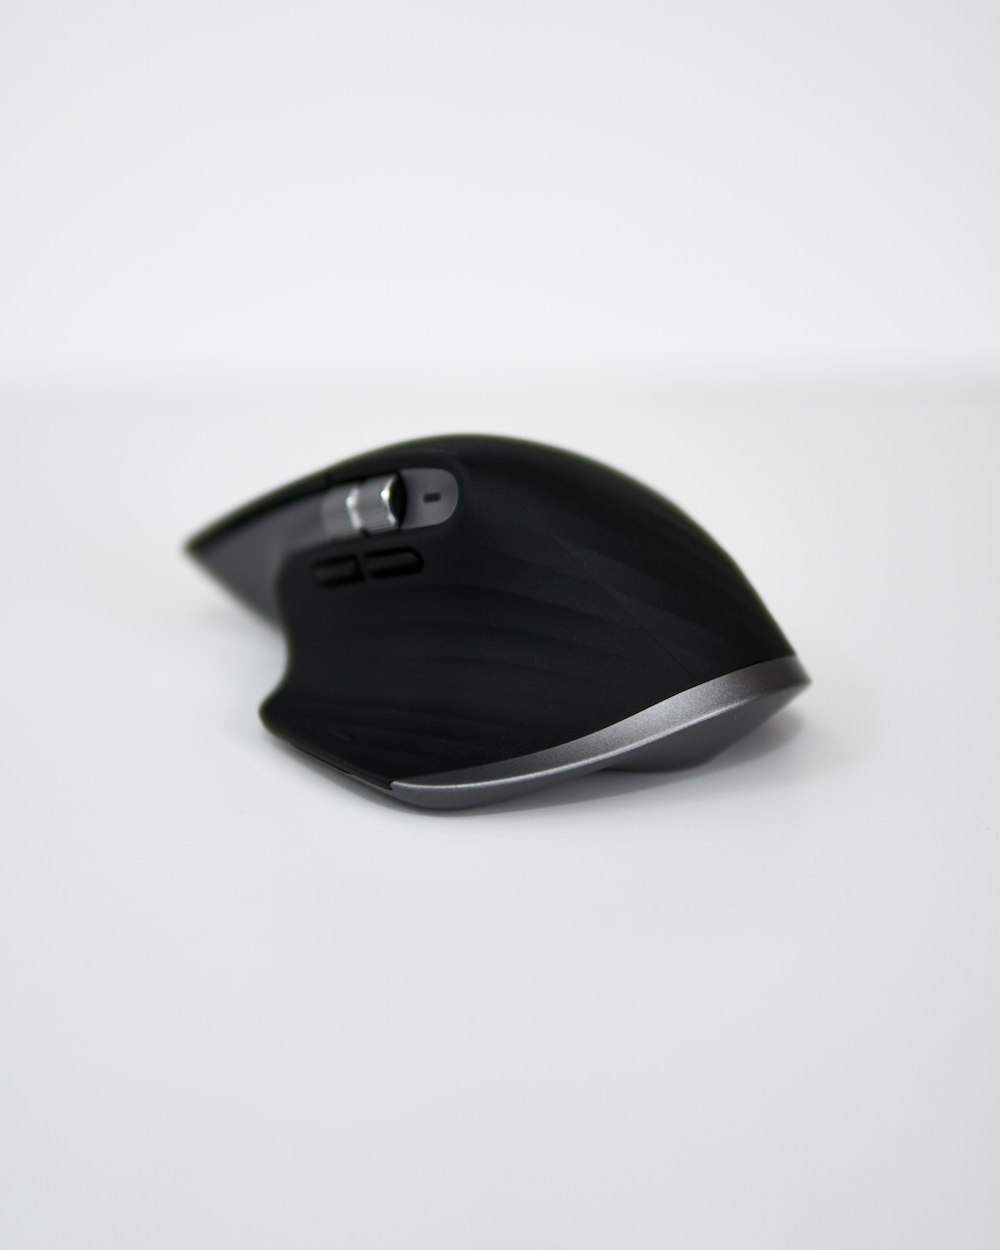 a black computer mouse sitting on top of a white table